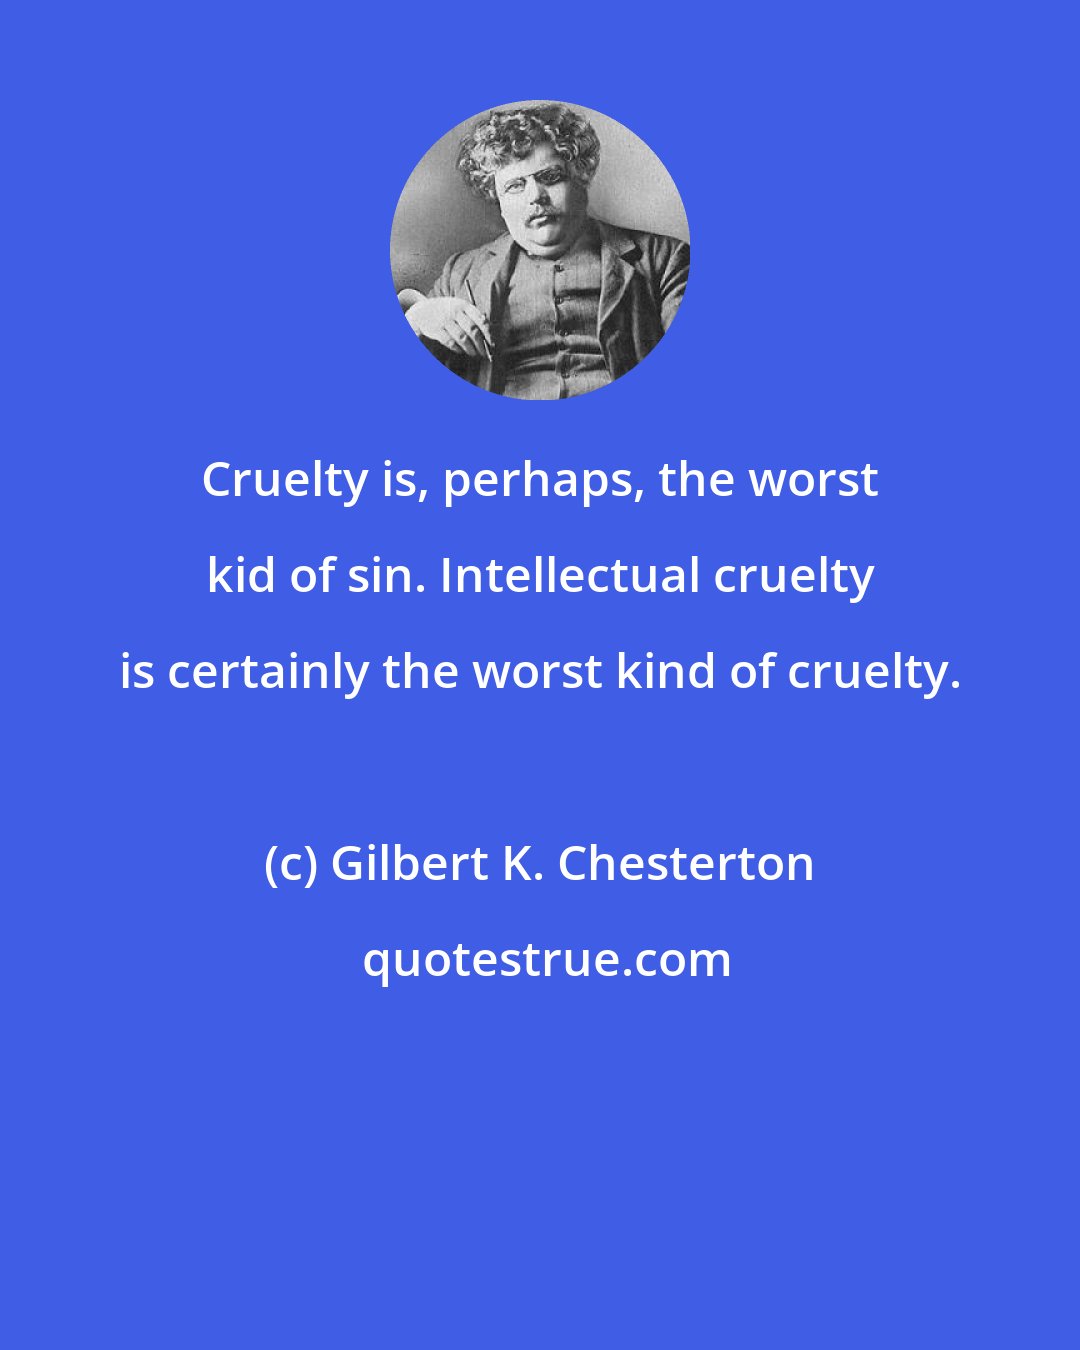 Gilbert K. Chesterton: Cruelty is, perhaps, the worst kid of sin. Intellectual cruelty is certainly the worst kind of cruelty.